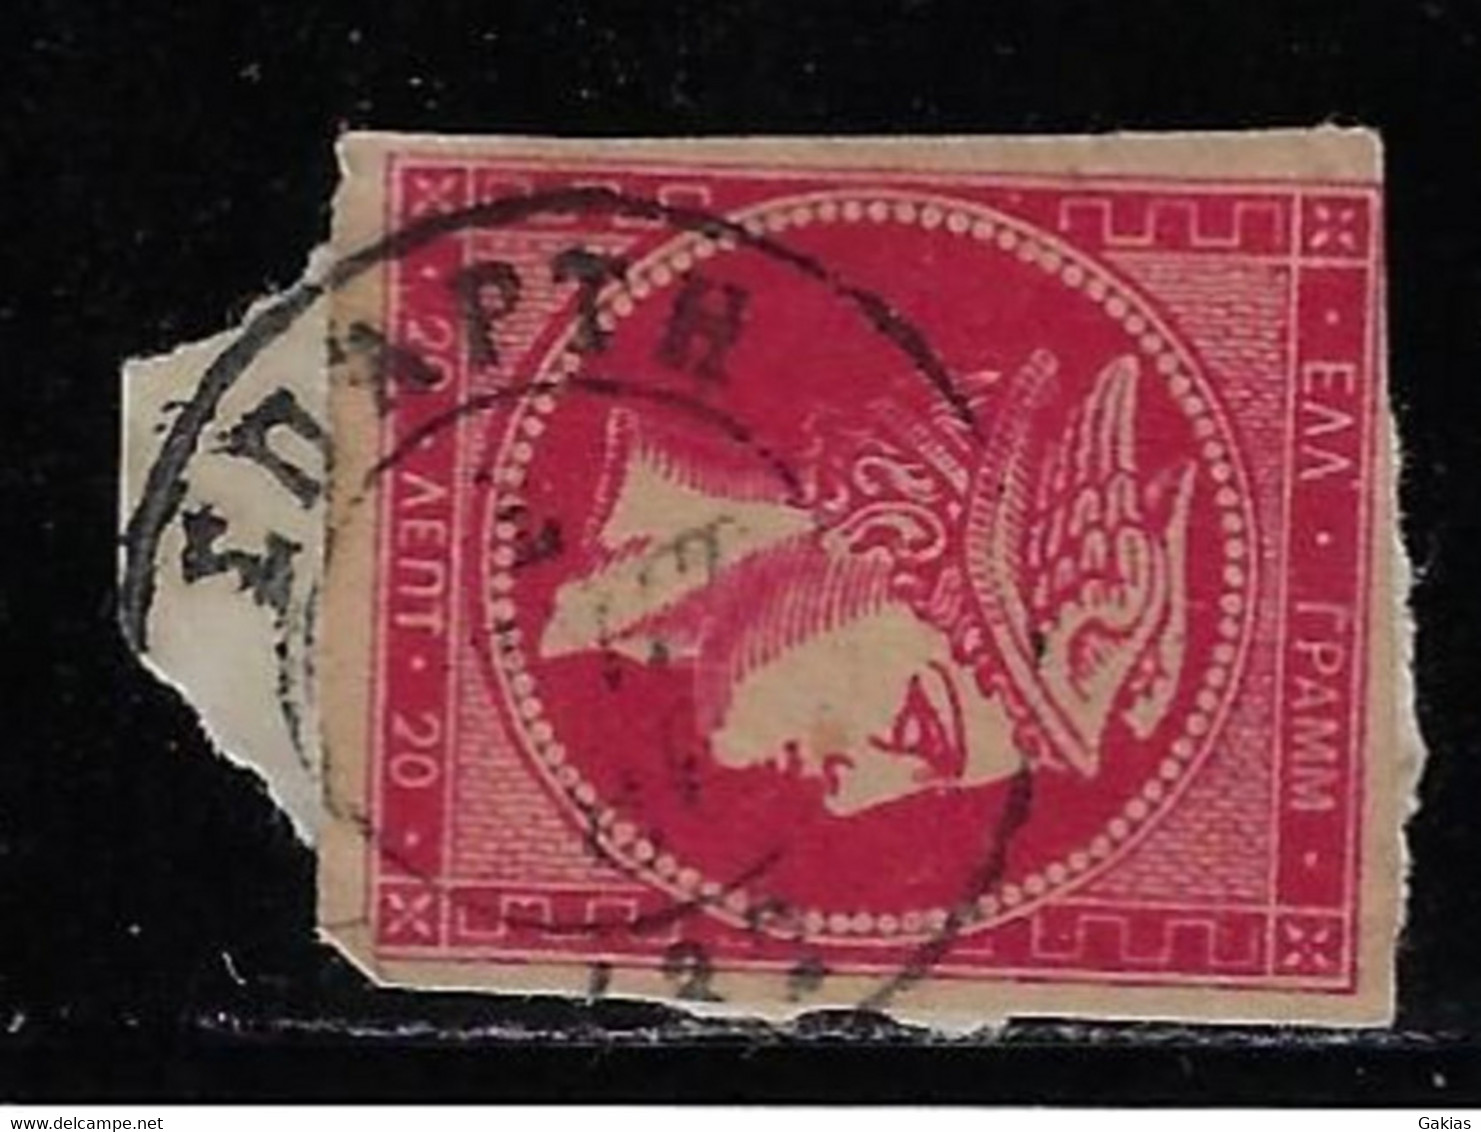 GREECE, LARGE HERMES HEAD 20 LEPTA Red Aniline ON PIECE, POSTMARK "SPARTI" (TYPE 2)(ΣΠΑΡΤΗ) - Used Stamps